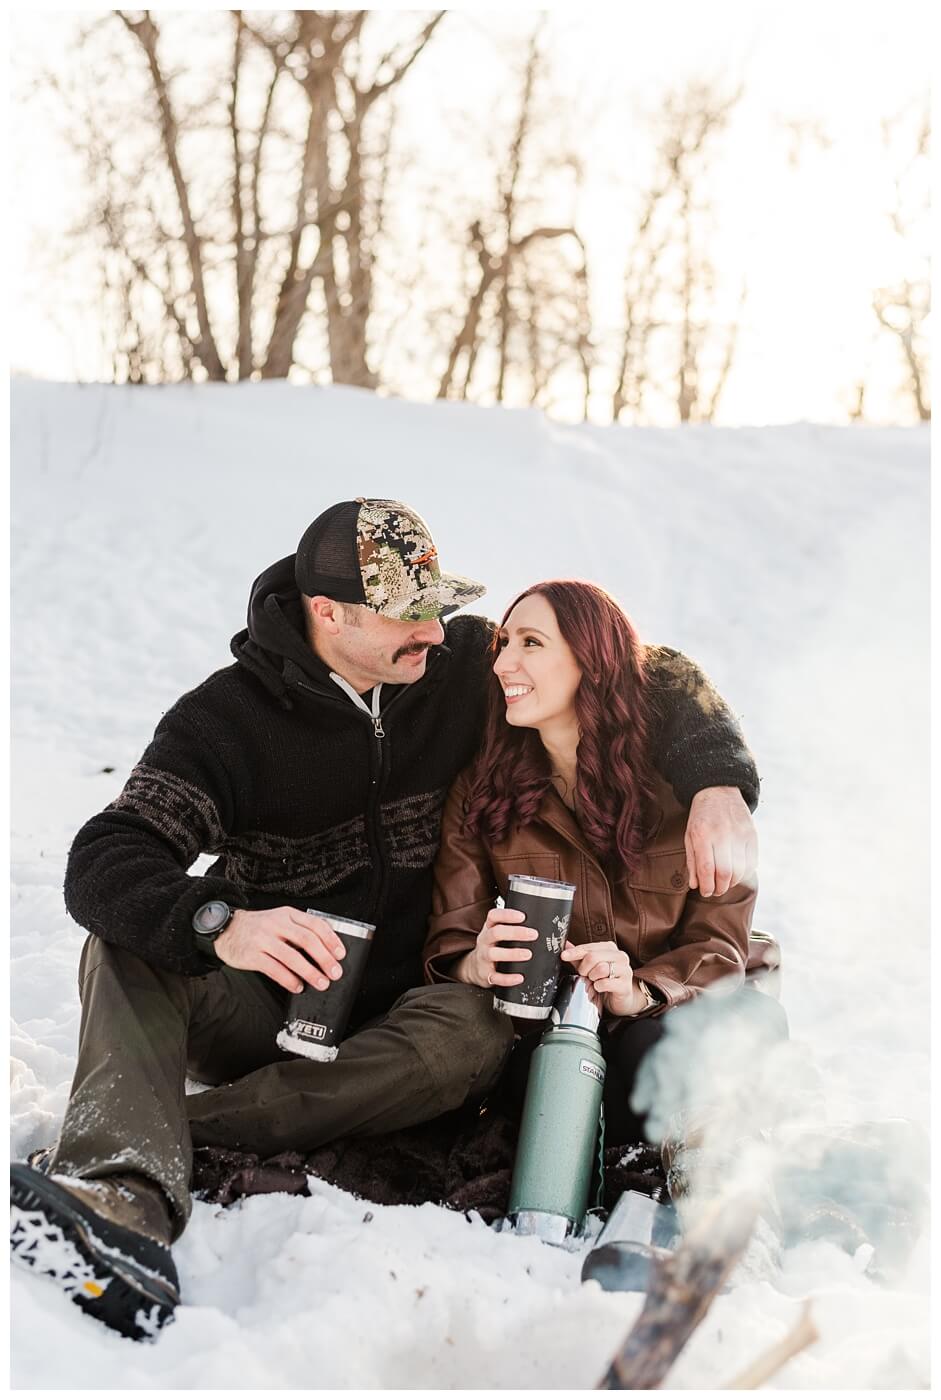 Brett & Brittany - Winter 2023 - Lumsden Valley - 01 - Couple sits drinking hot chocolate by the fire